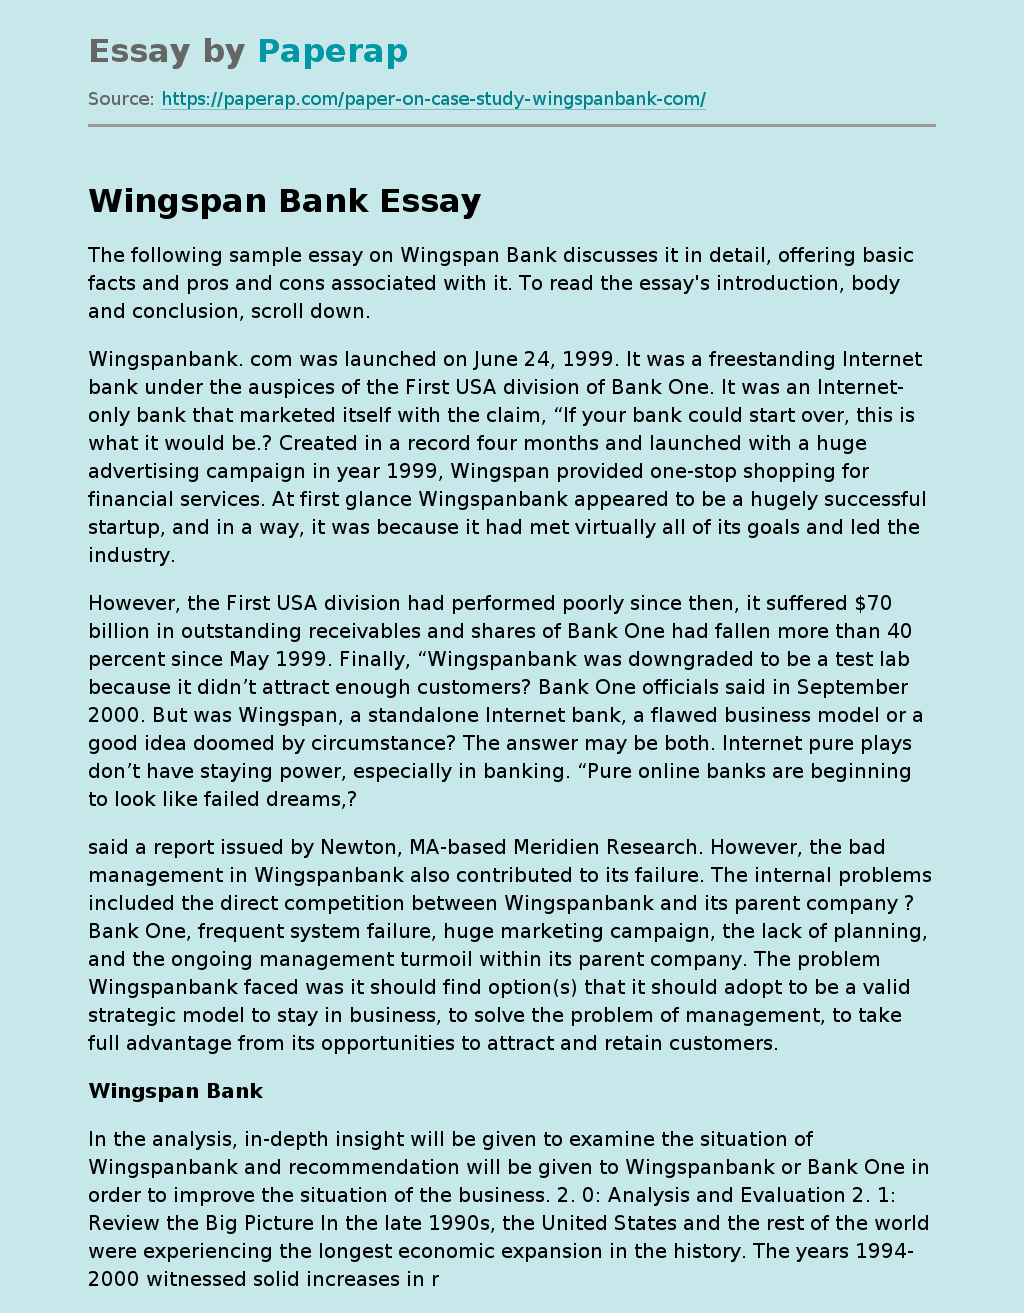 Wingspan Bank: Pros and Cons